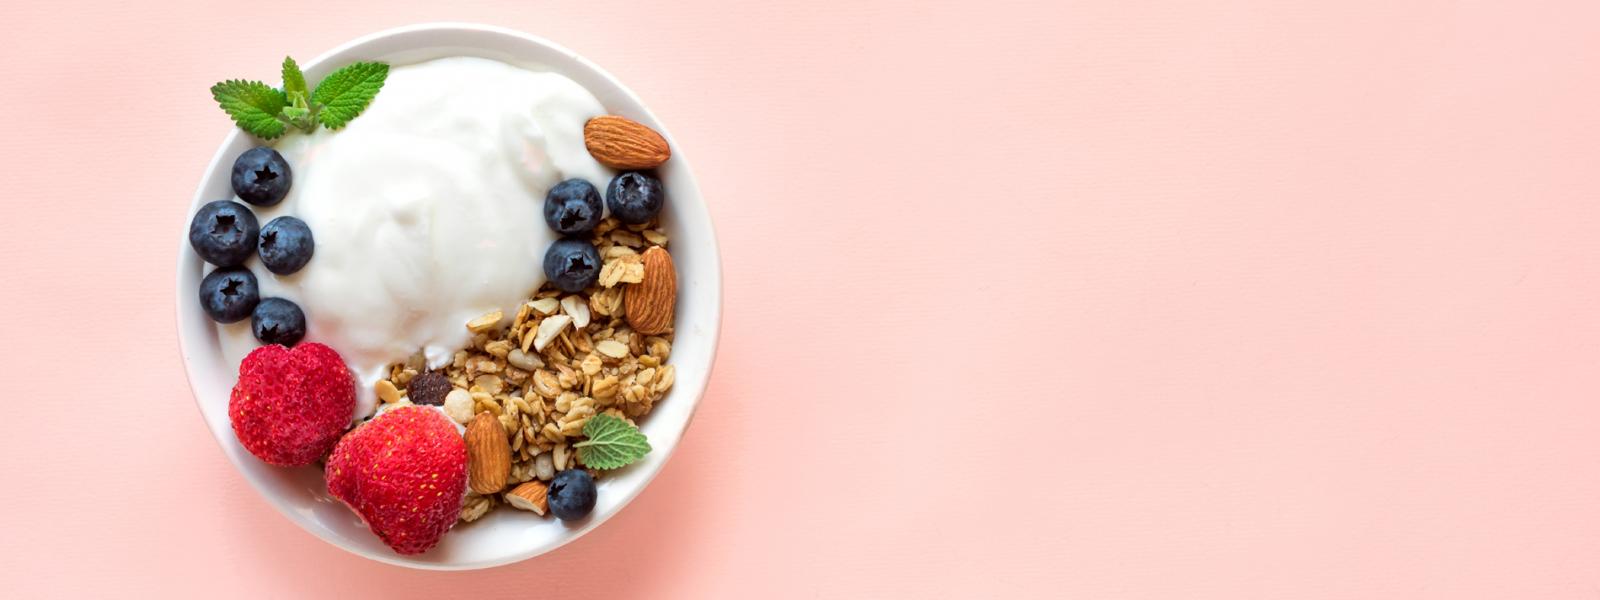 A bowl of yougurt, blueberries and some granola as seen from above